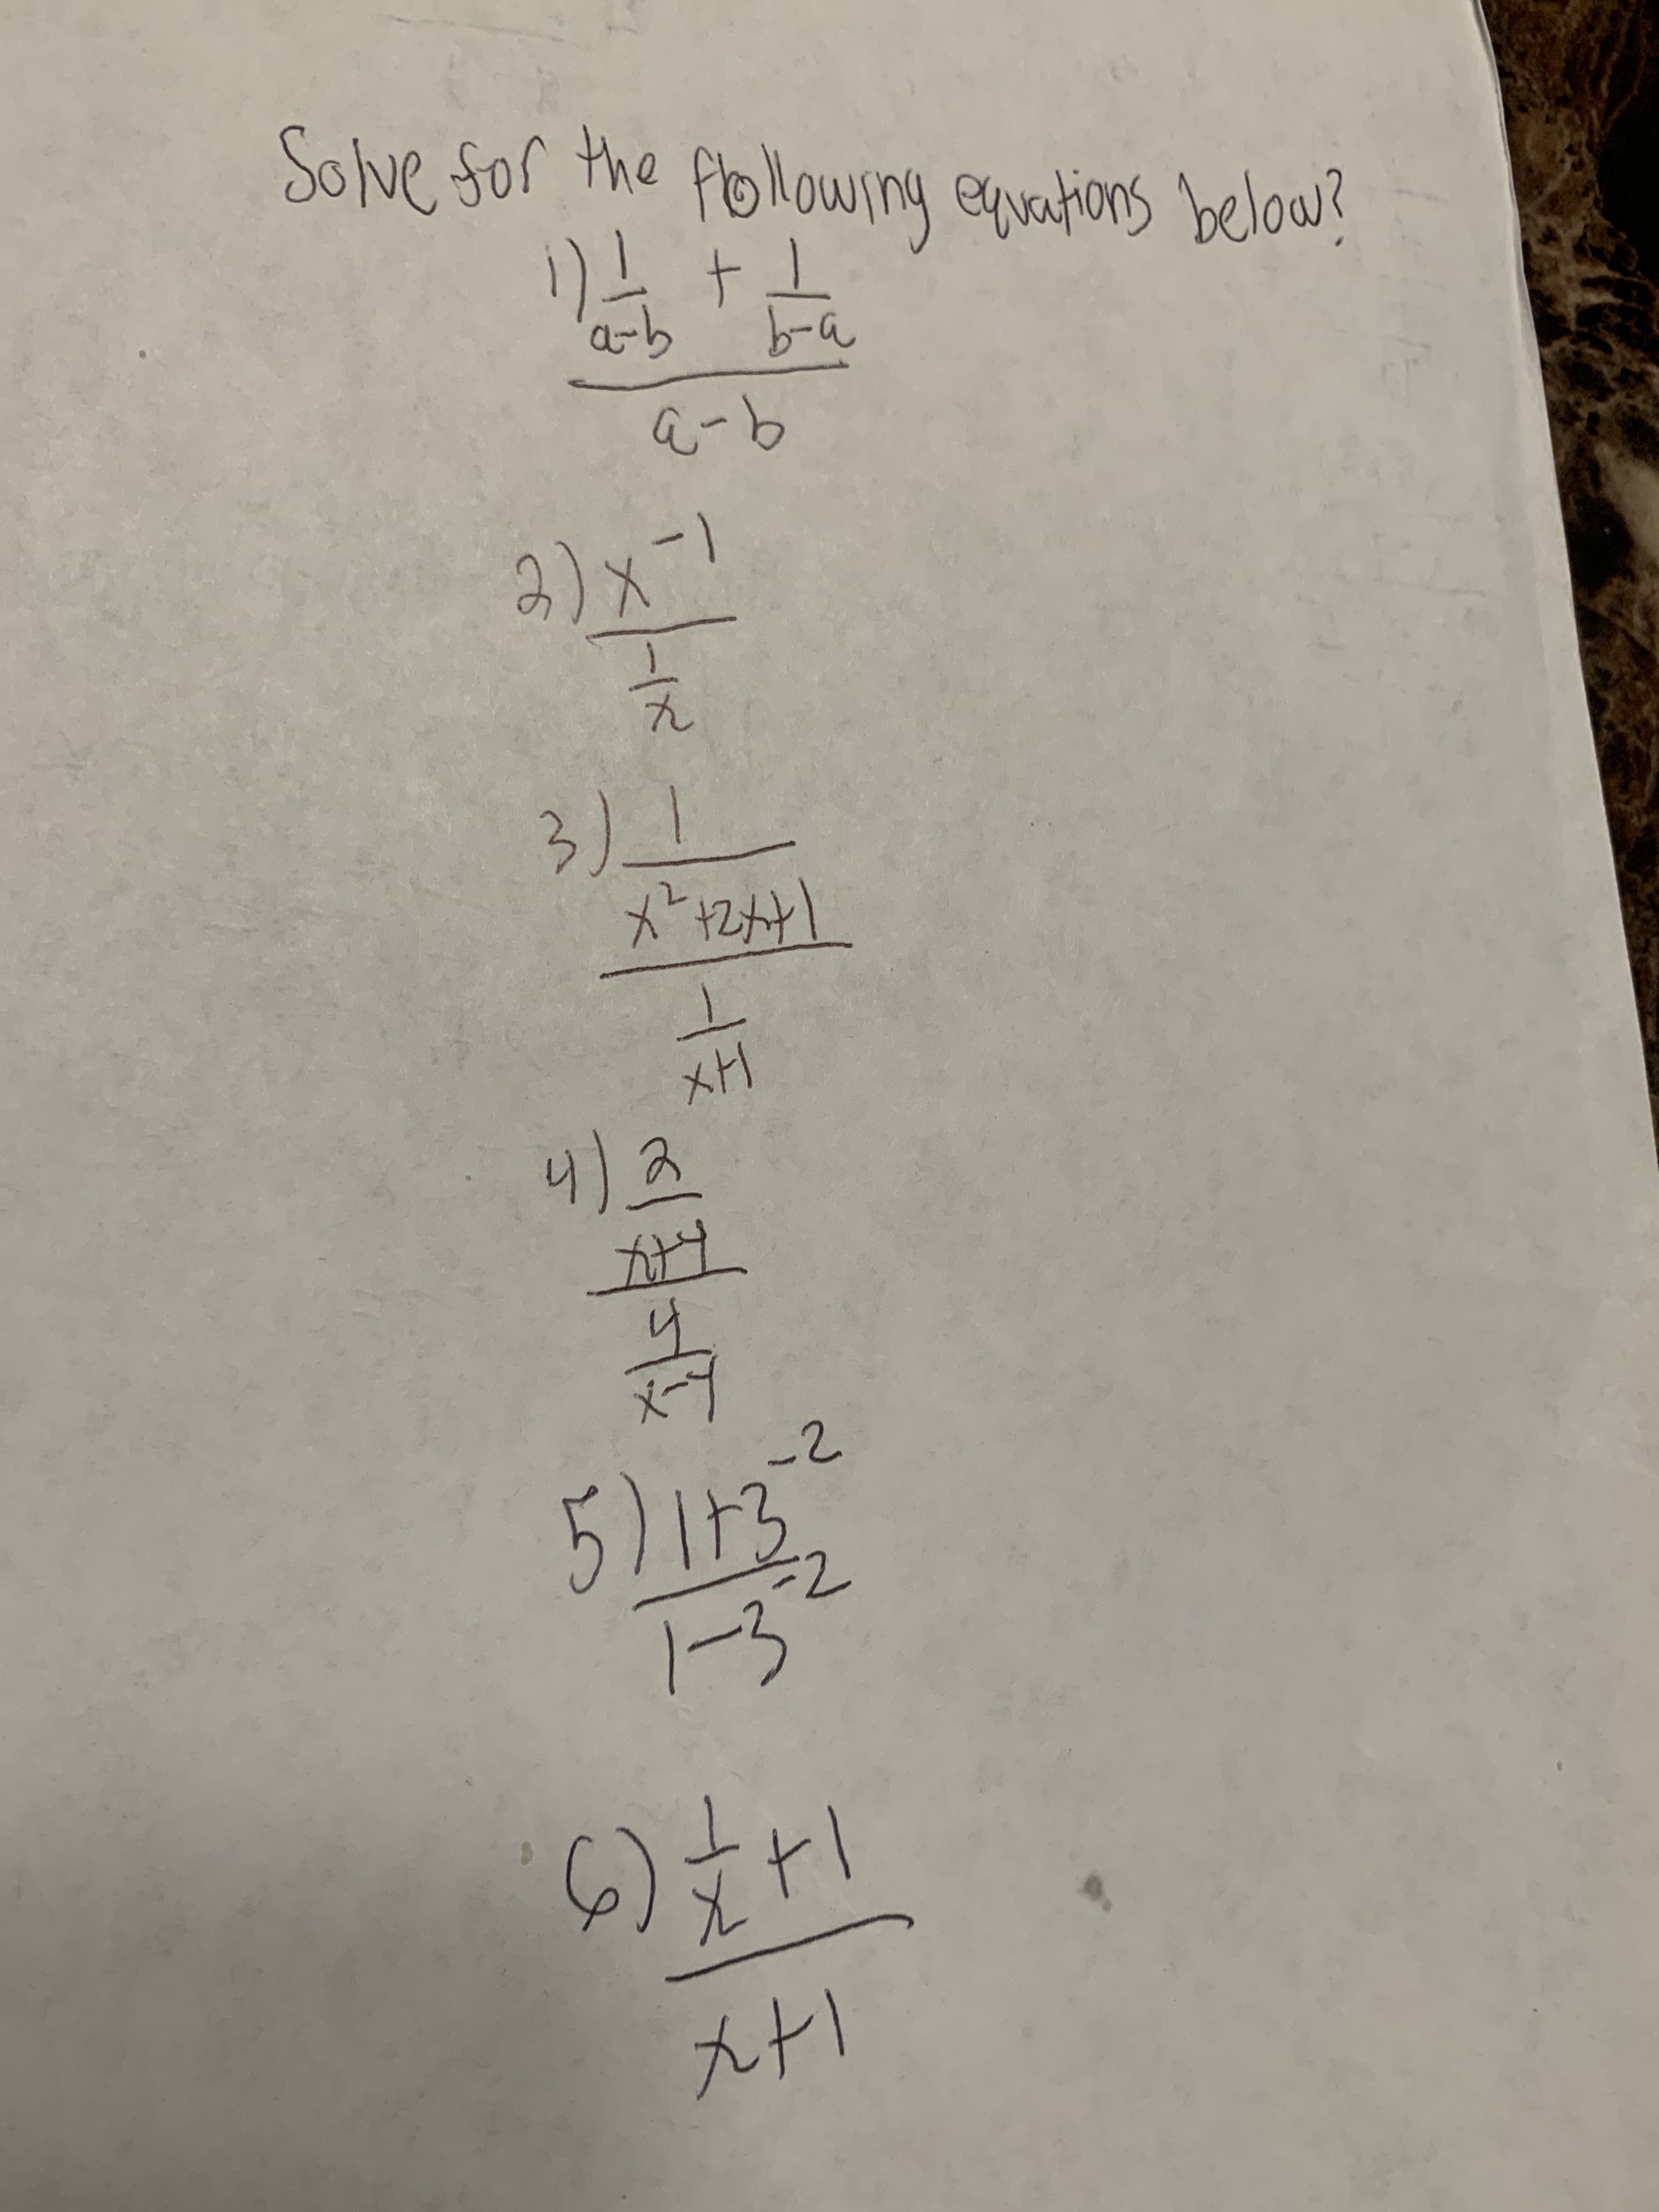 It
1-3°
3.
9-0
-9
9-D
Solve Sor the Pollowing enrations below?
